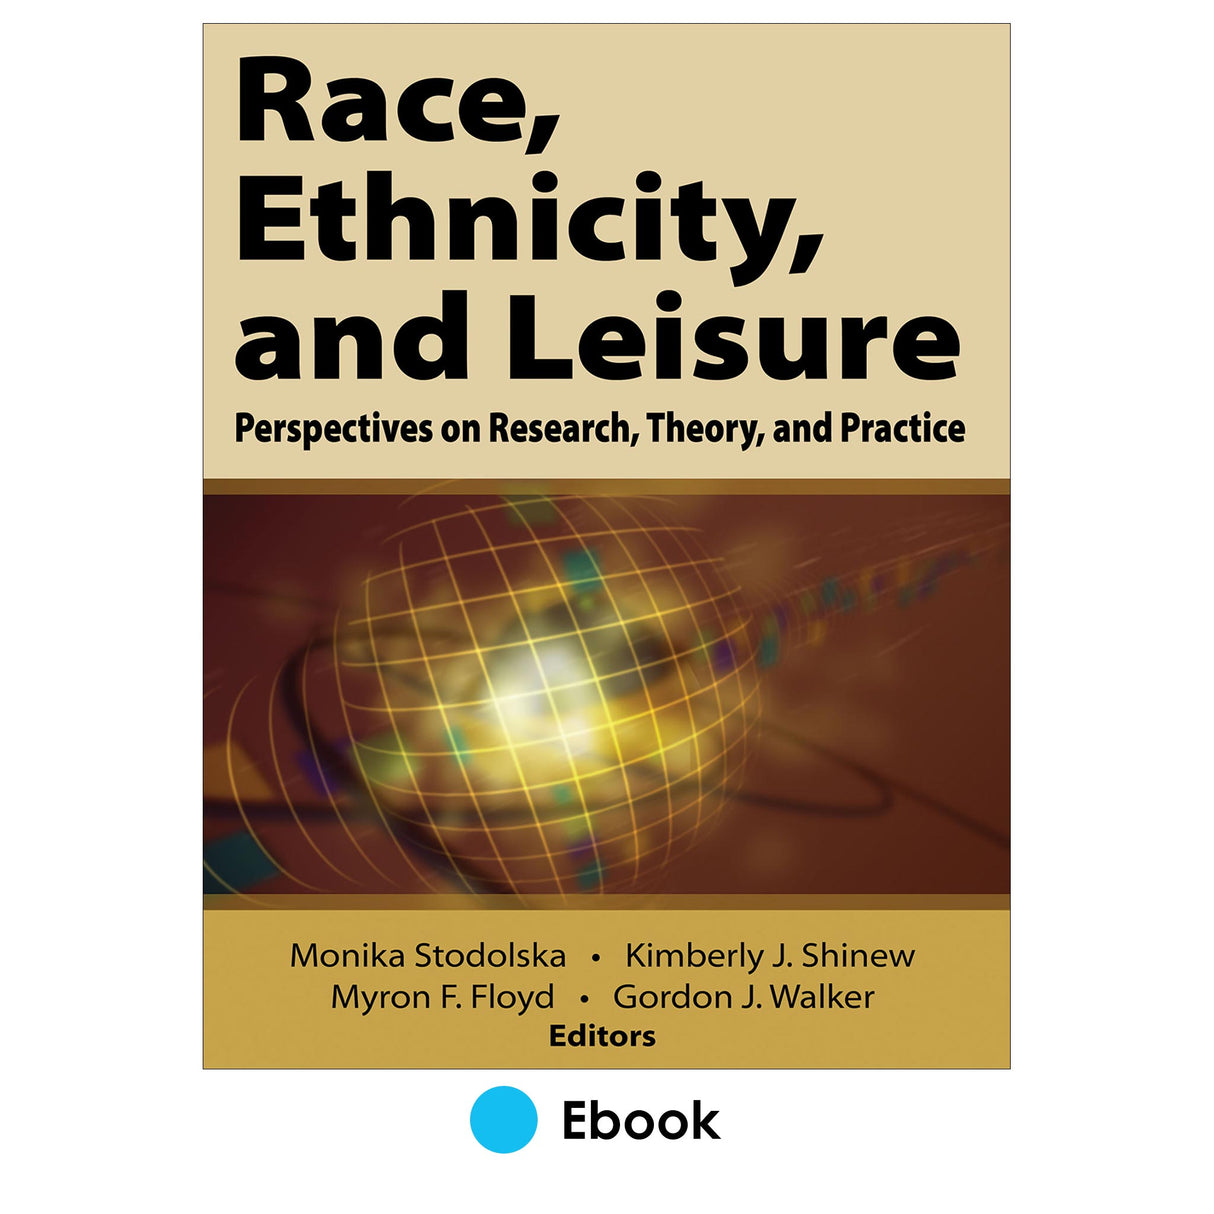 Race, Ethnicity, and Leisure PDF